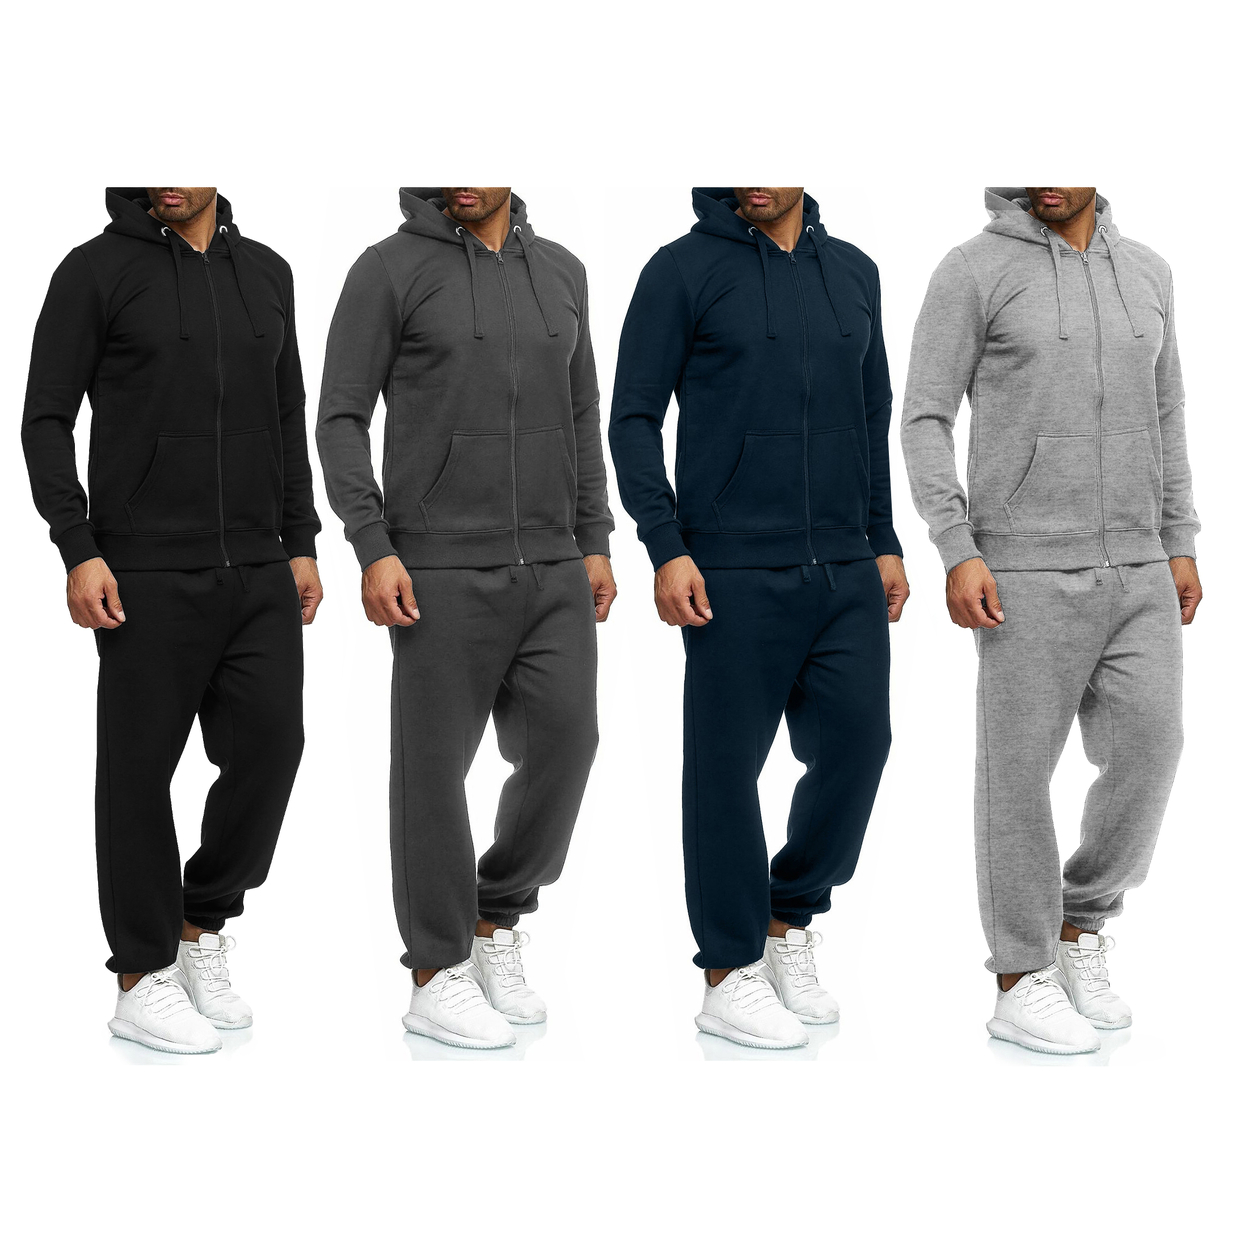 2-Pack: Men's Casual Big & Tall Athletic Active Winter Warm Fleece Lined Full Zip Tracksuit Jogger Set - Grey, X-large